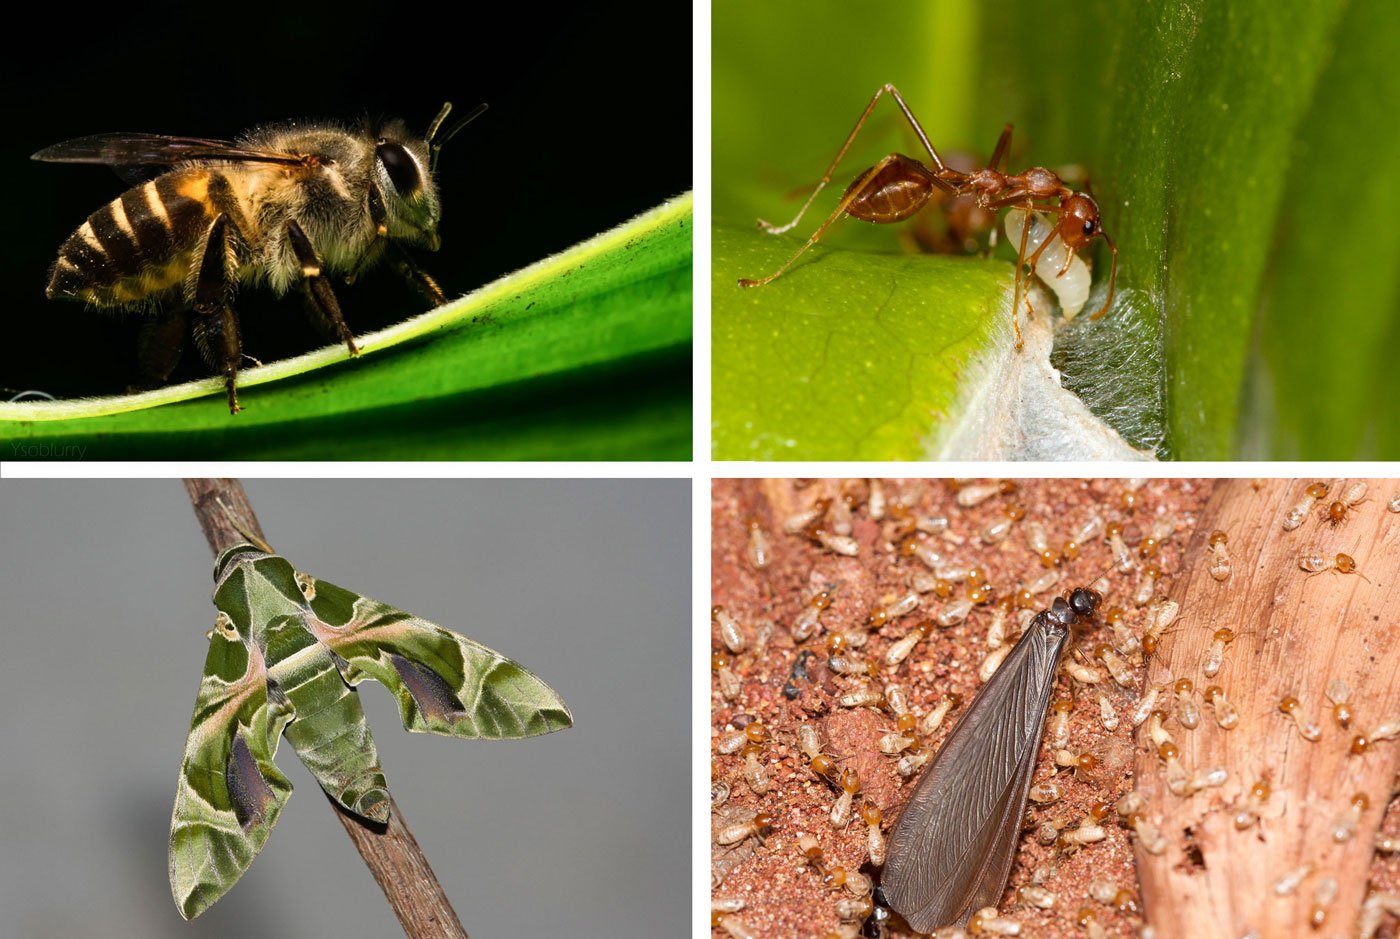 Top left: The apis cerana indica or the 'bee', resting on the oleander plant. Top right: Oecophylla smaragdina, the weaver ant, making a nest using silk produced by its young one. Bottom left: Daphnis nerii, the hawk moth, emerges at night and helps in pollination. Bottom right: Just before the rains, the winged form female termite emerges and leaves the the colony to form a new colony. The small ones are the infertile soldiers who break down organic matter like dead trees. These termites are also food for some human communities who eat it for the high protein content